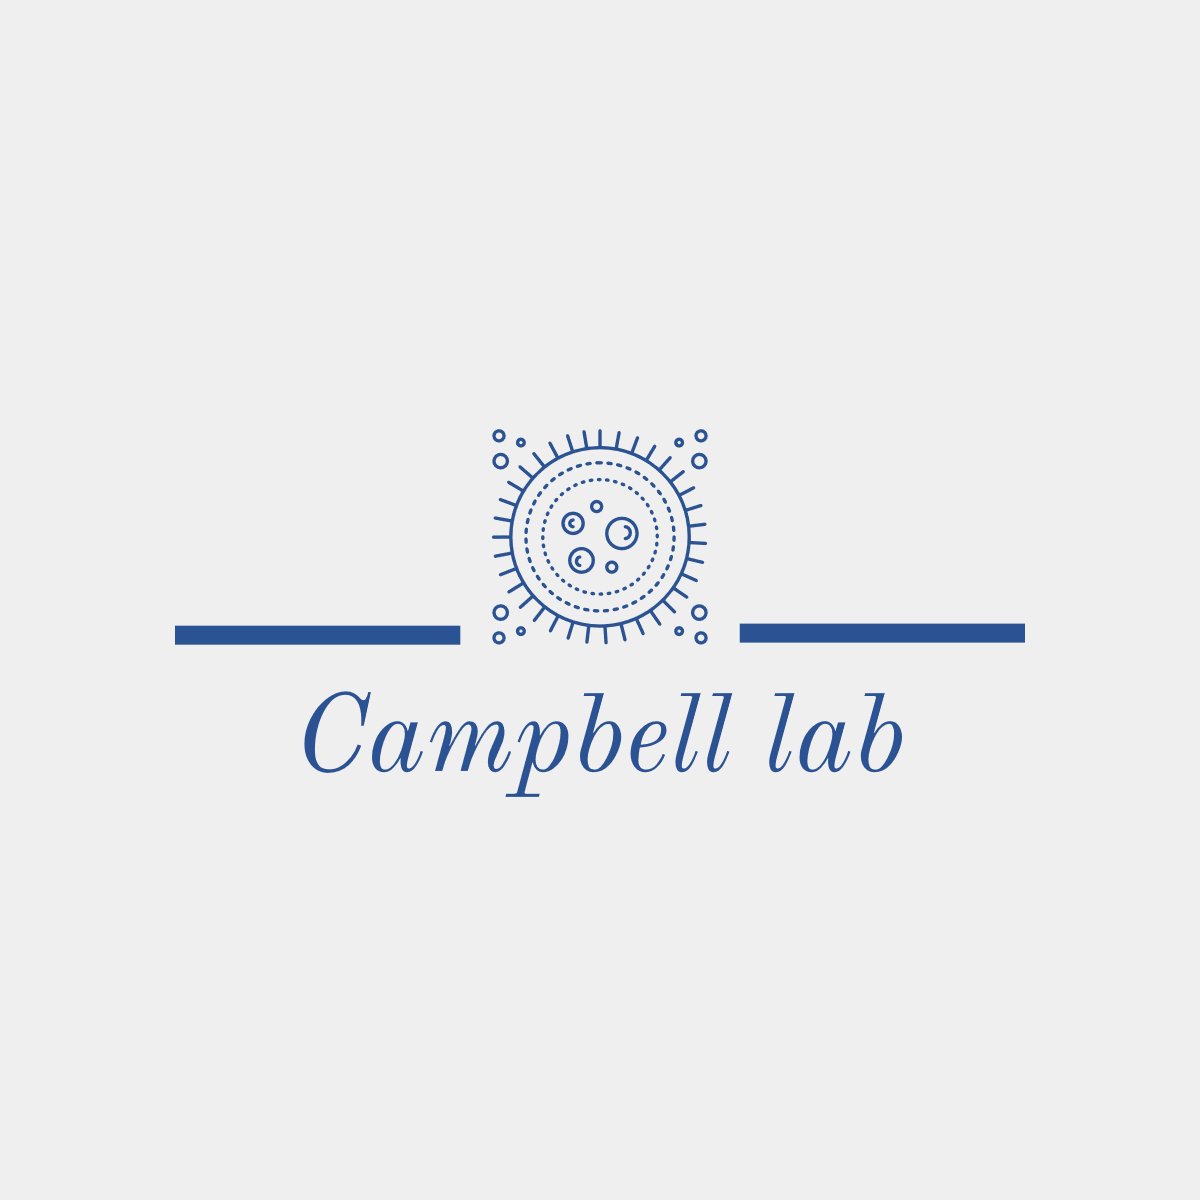 Campbell lab UCSD